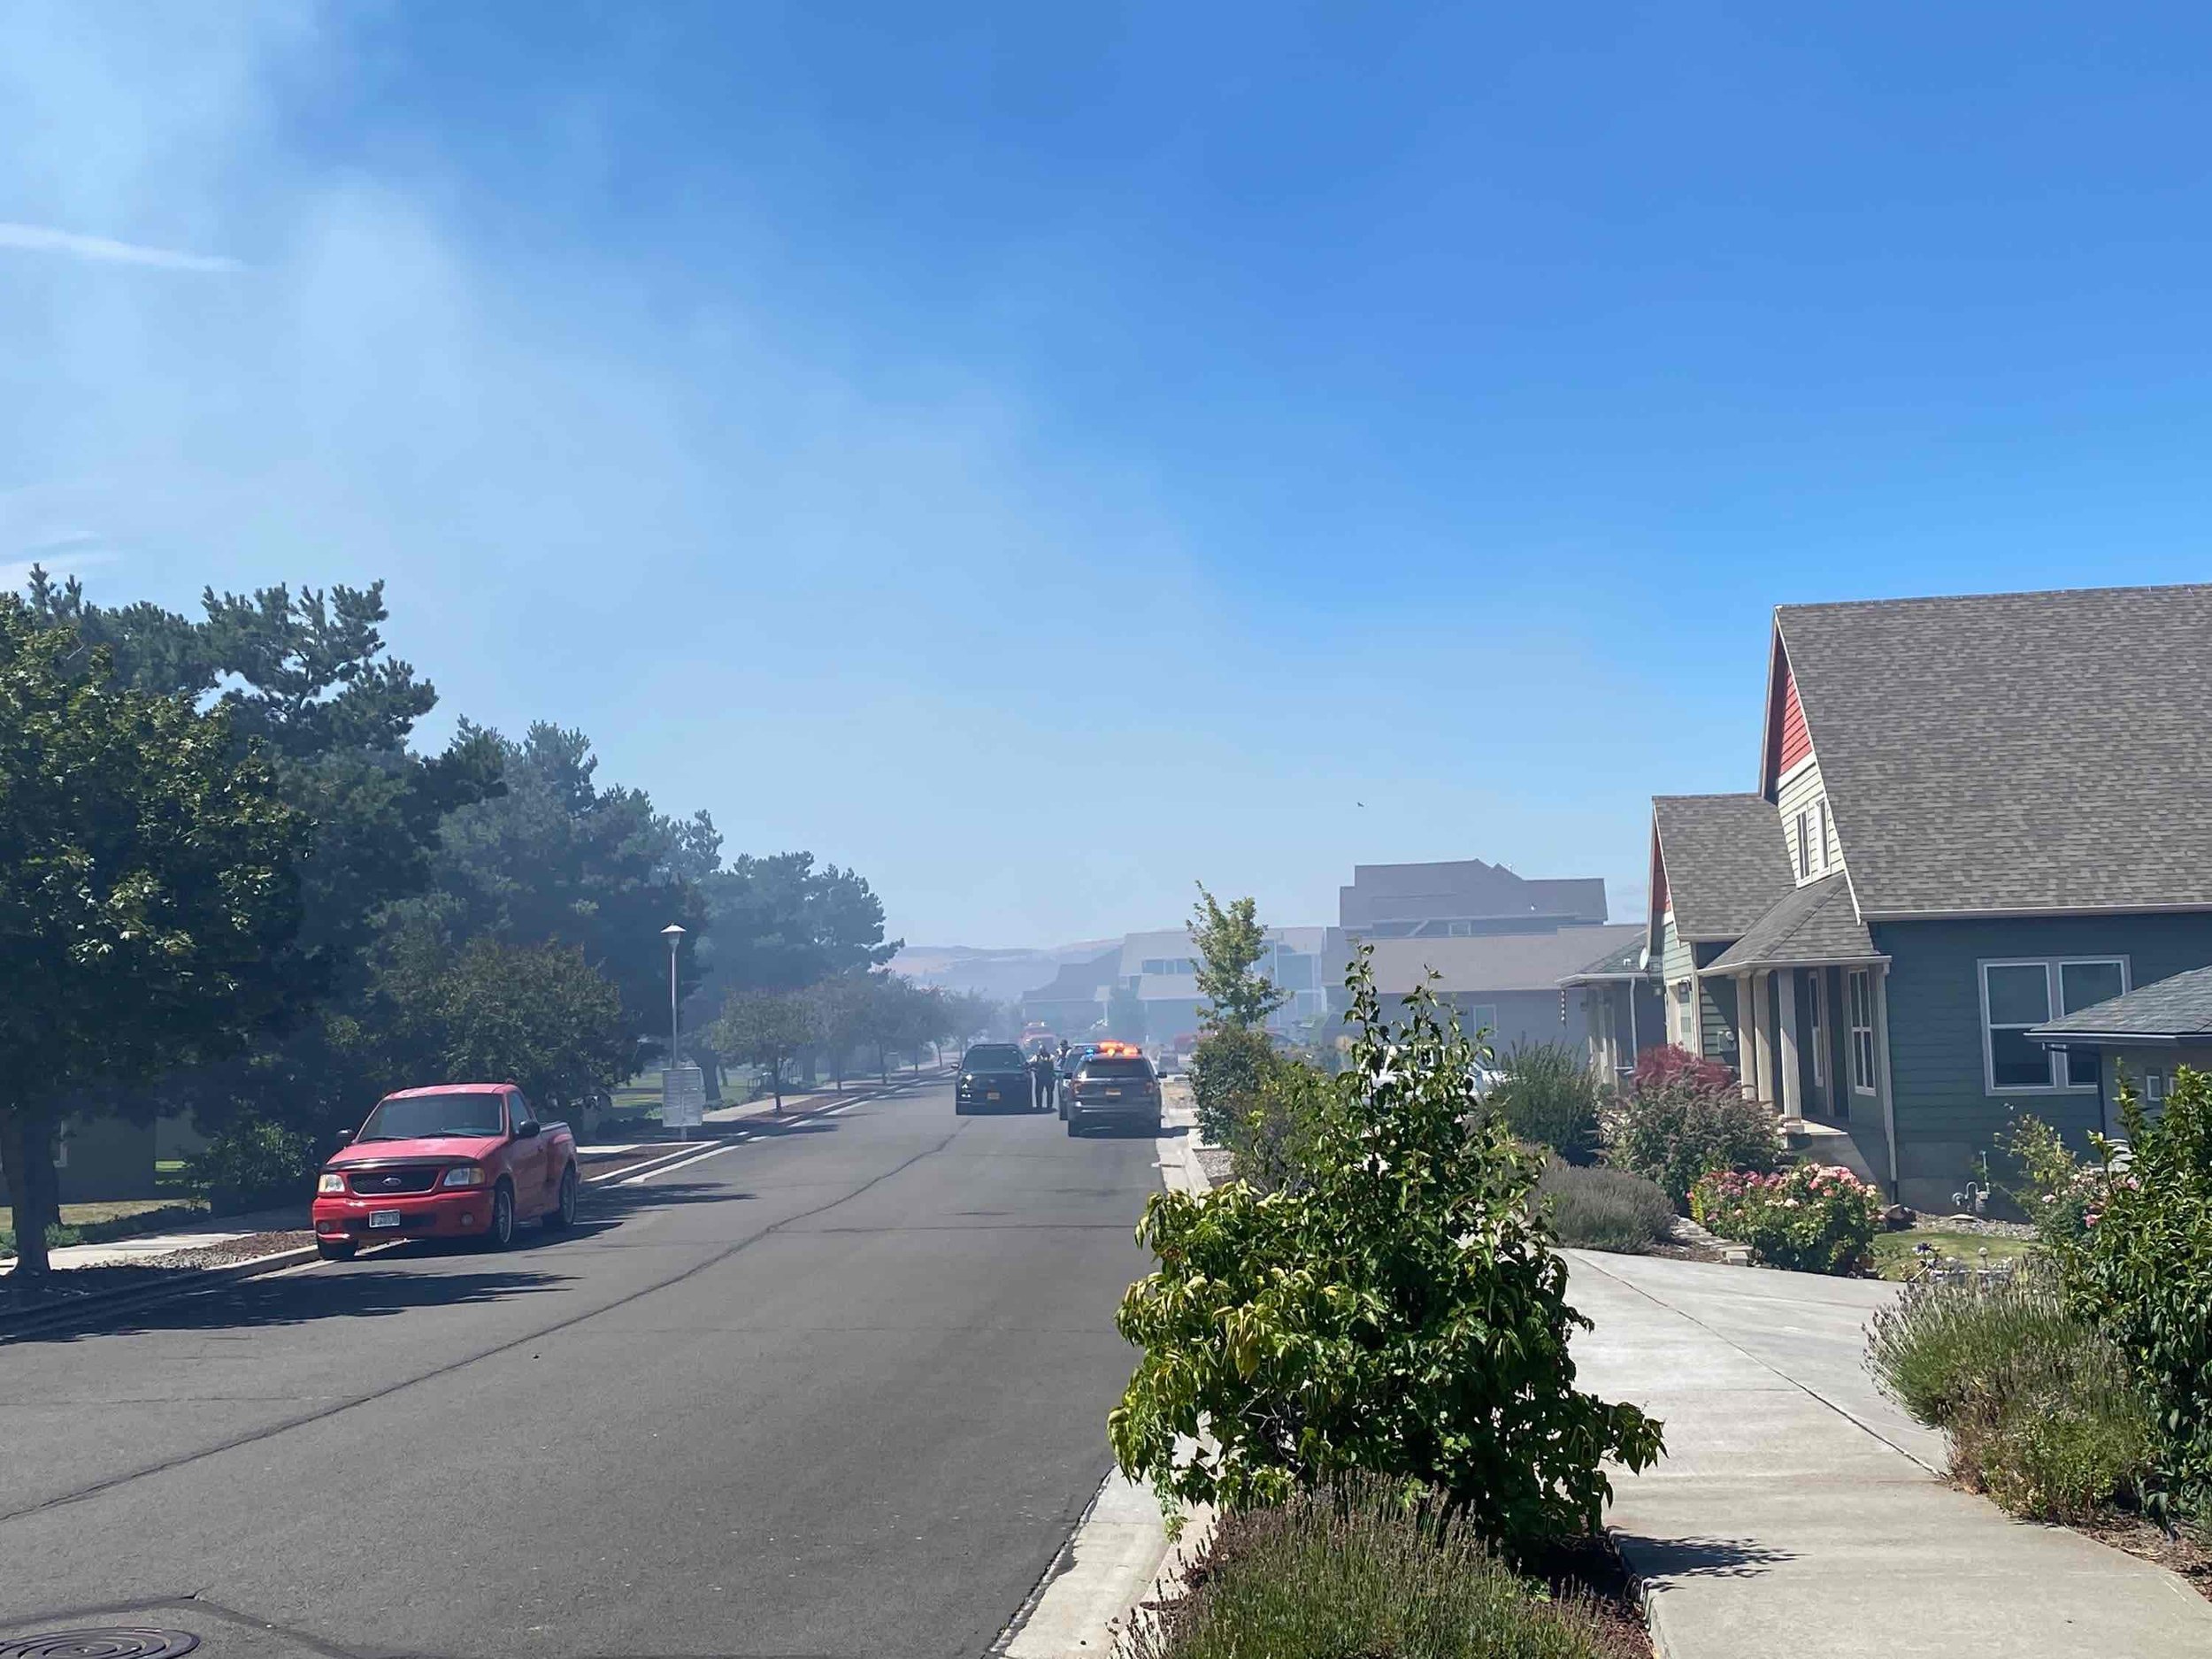 Smoke billows over homes on Columbia View Heights. Photo Credit: Tom Peterson